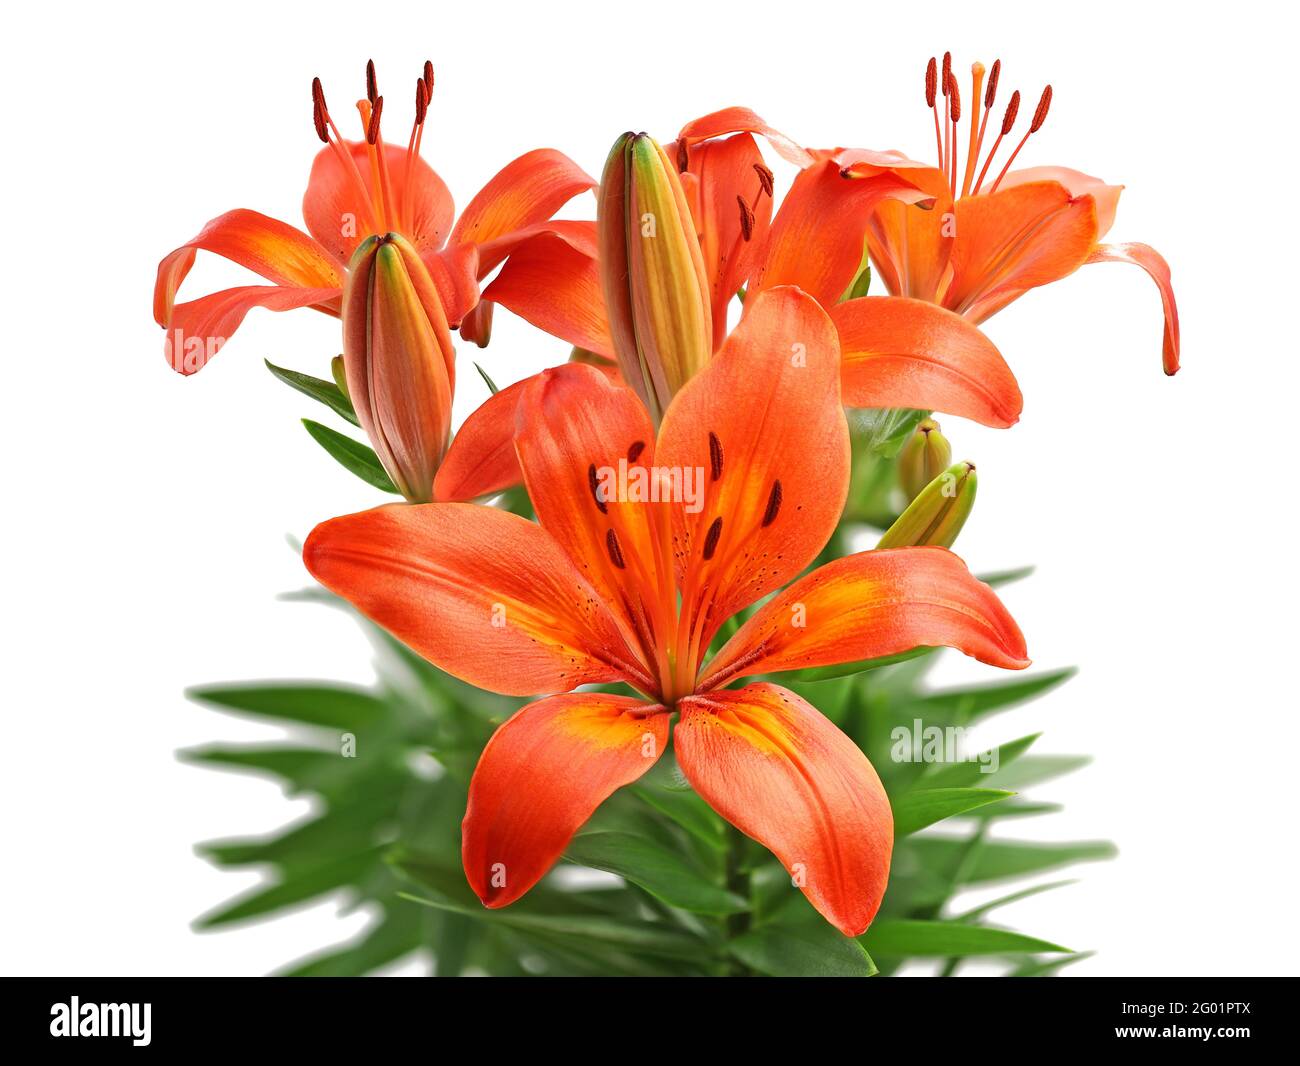 orange lily bouquet isolated on white background, high detail studio shot of blooming lilies Stock Photo